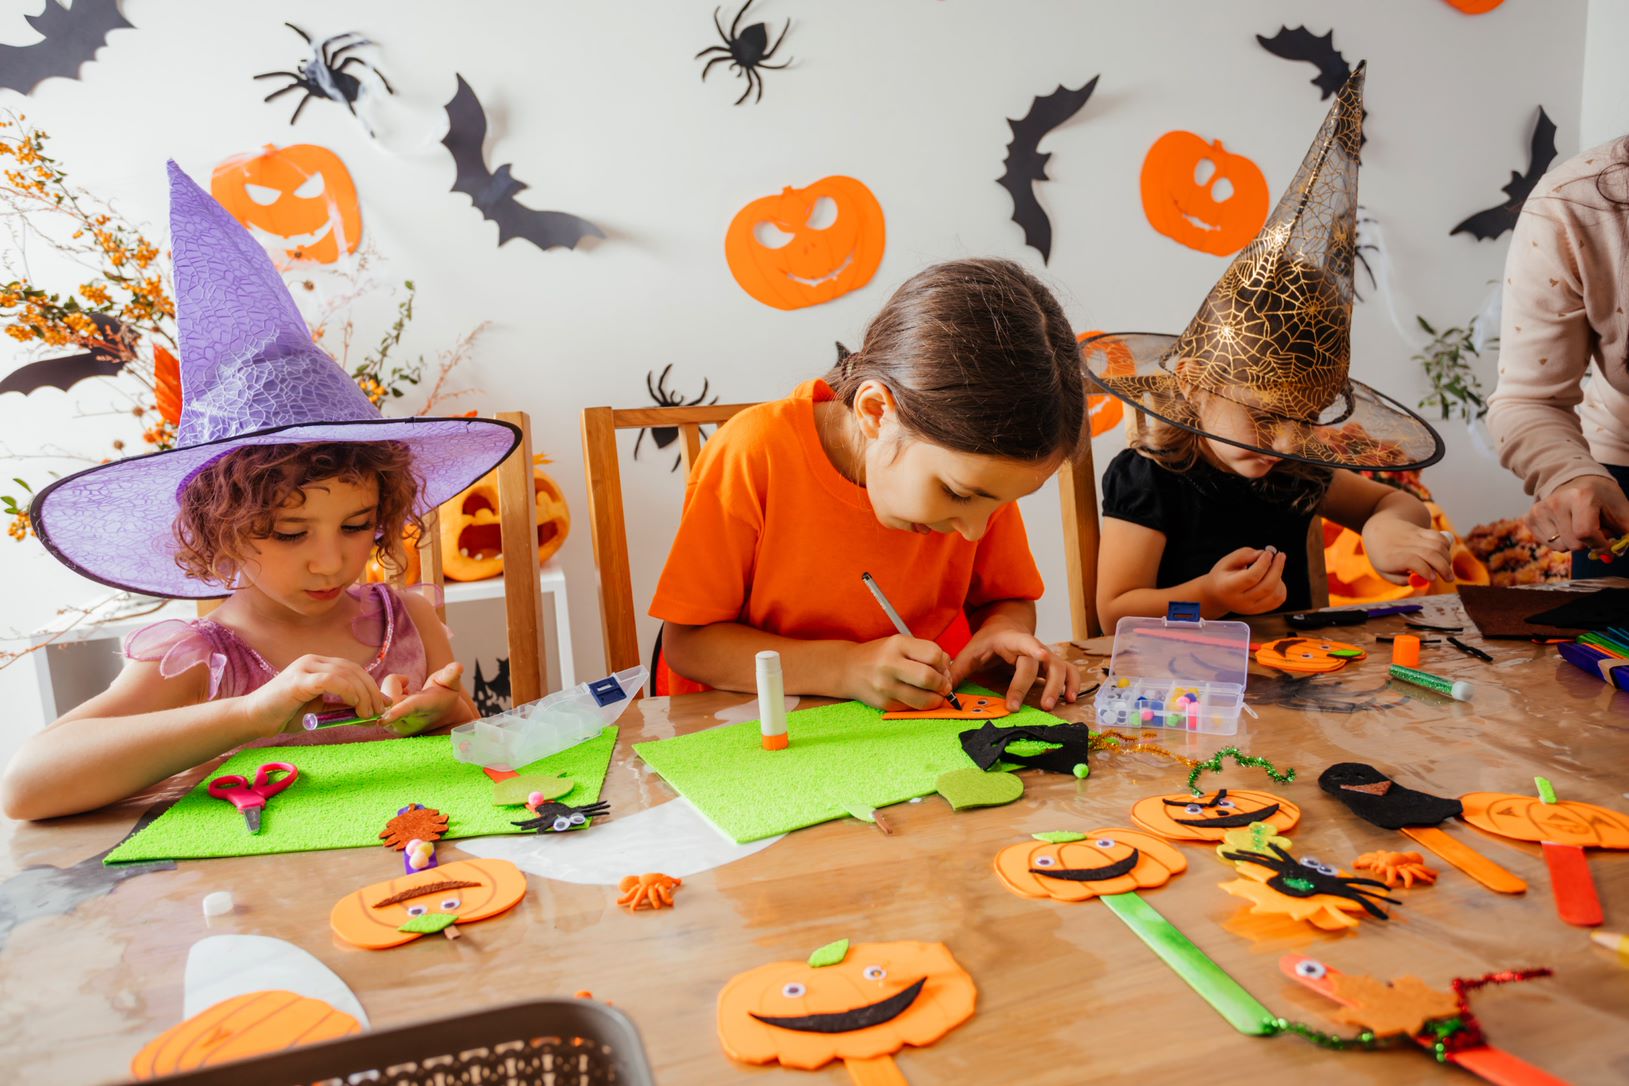 Blog post 4 DIY Ideas to Make Your Halloween Extra Special main image